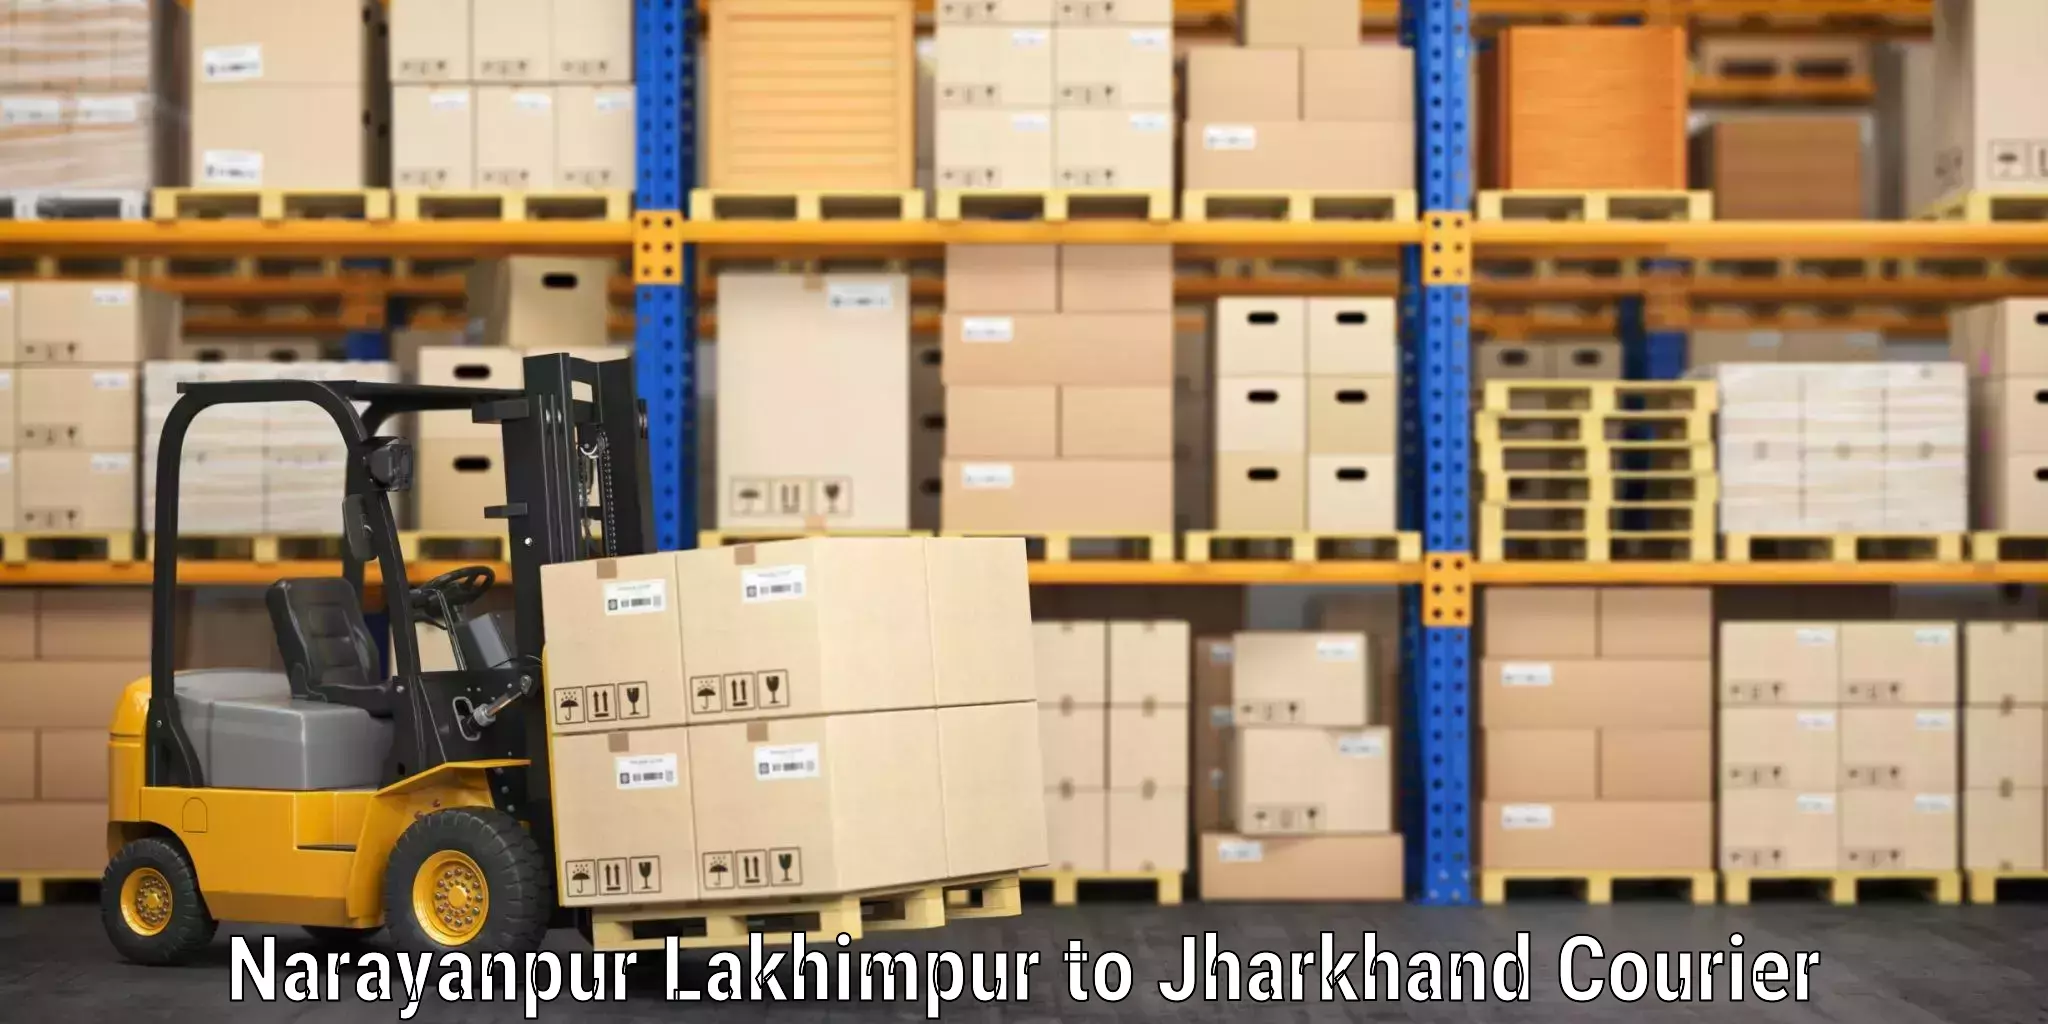 Luggage transport deals Narayanpur Lakhimpur to Jharkhand